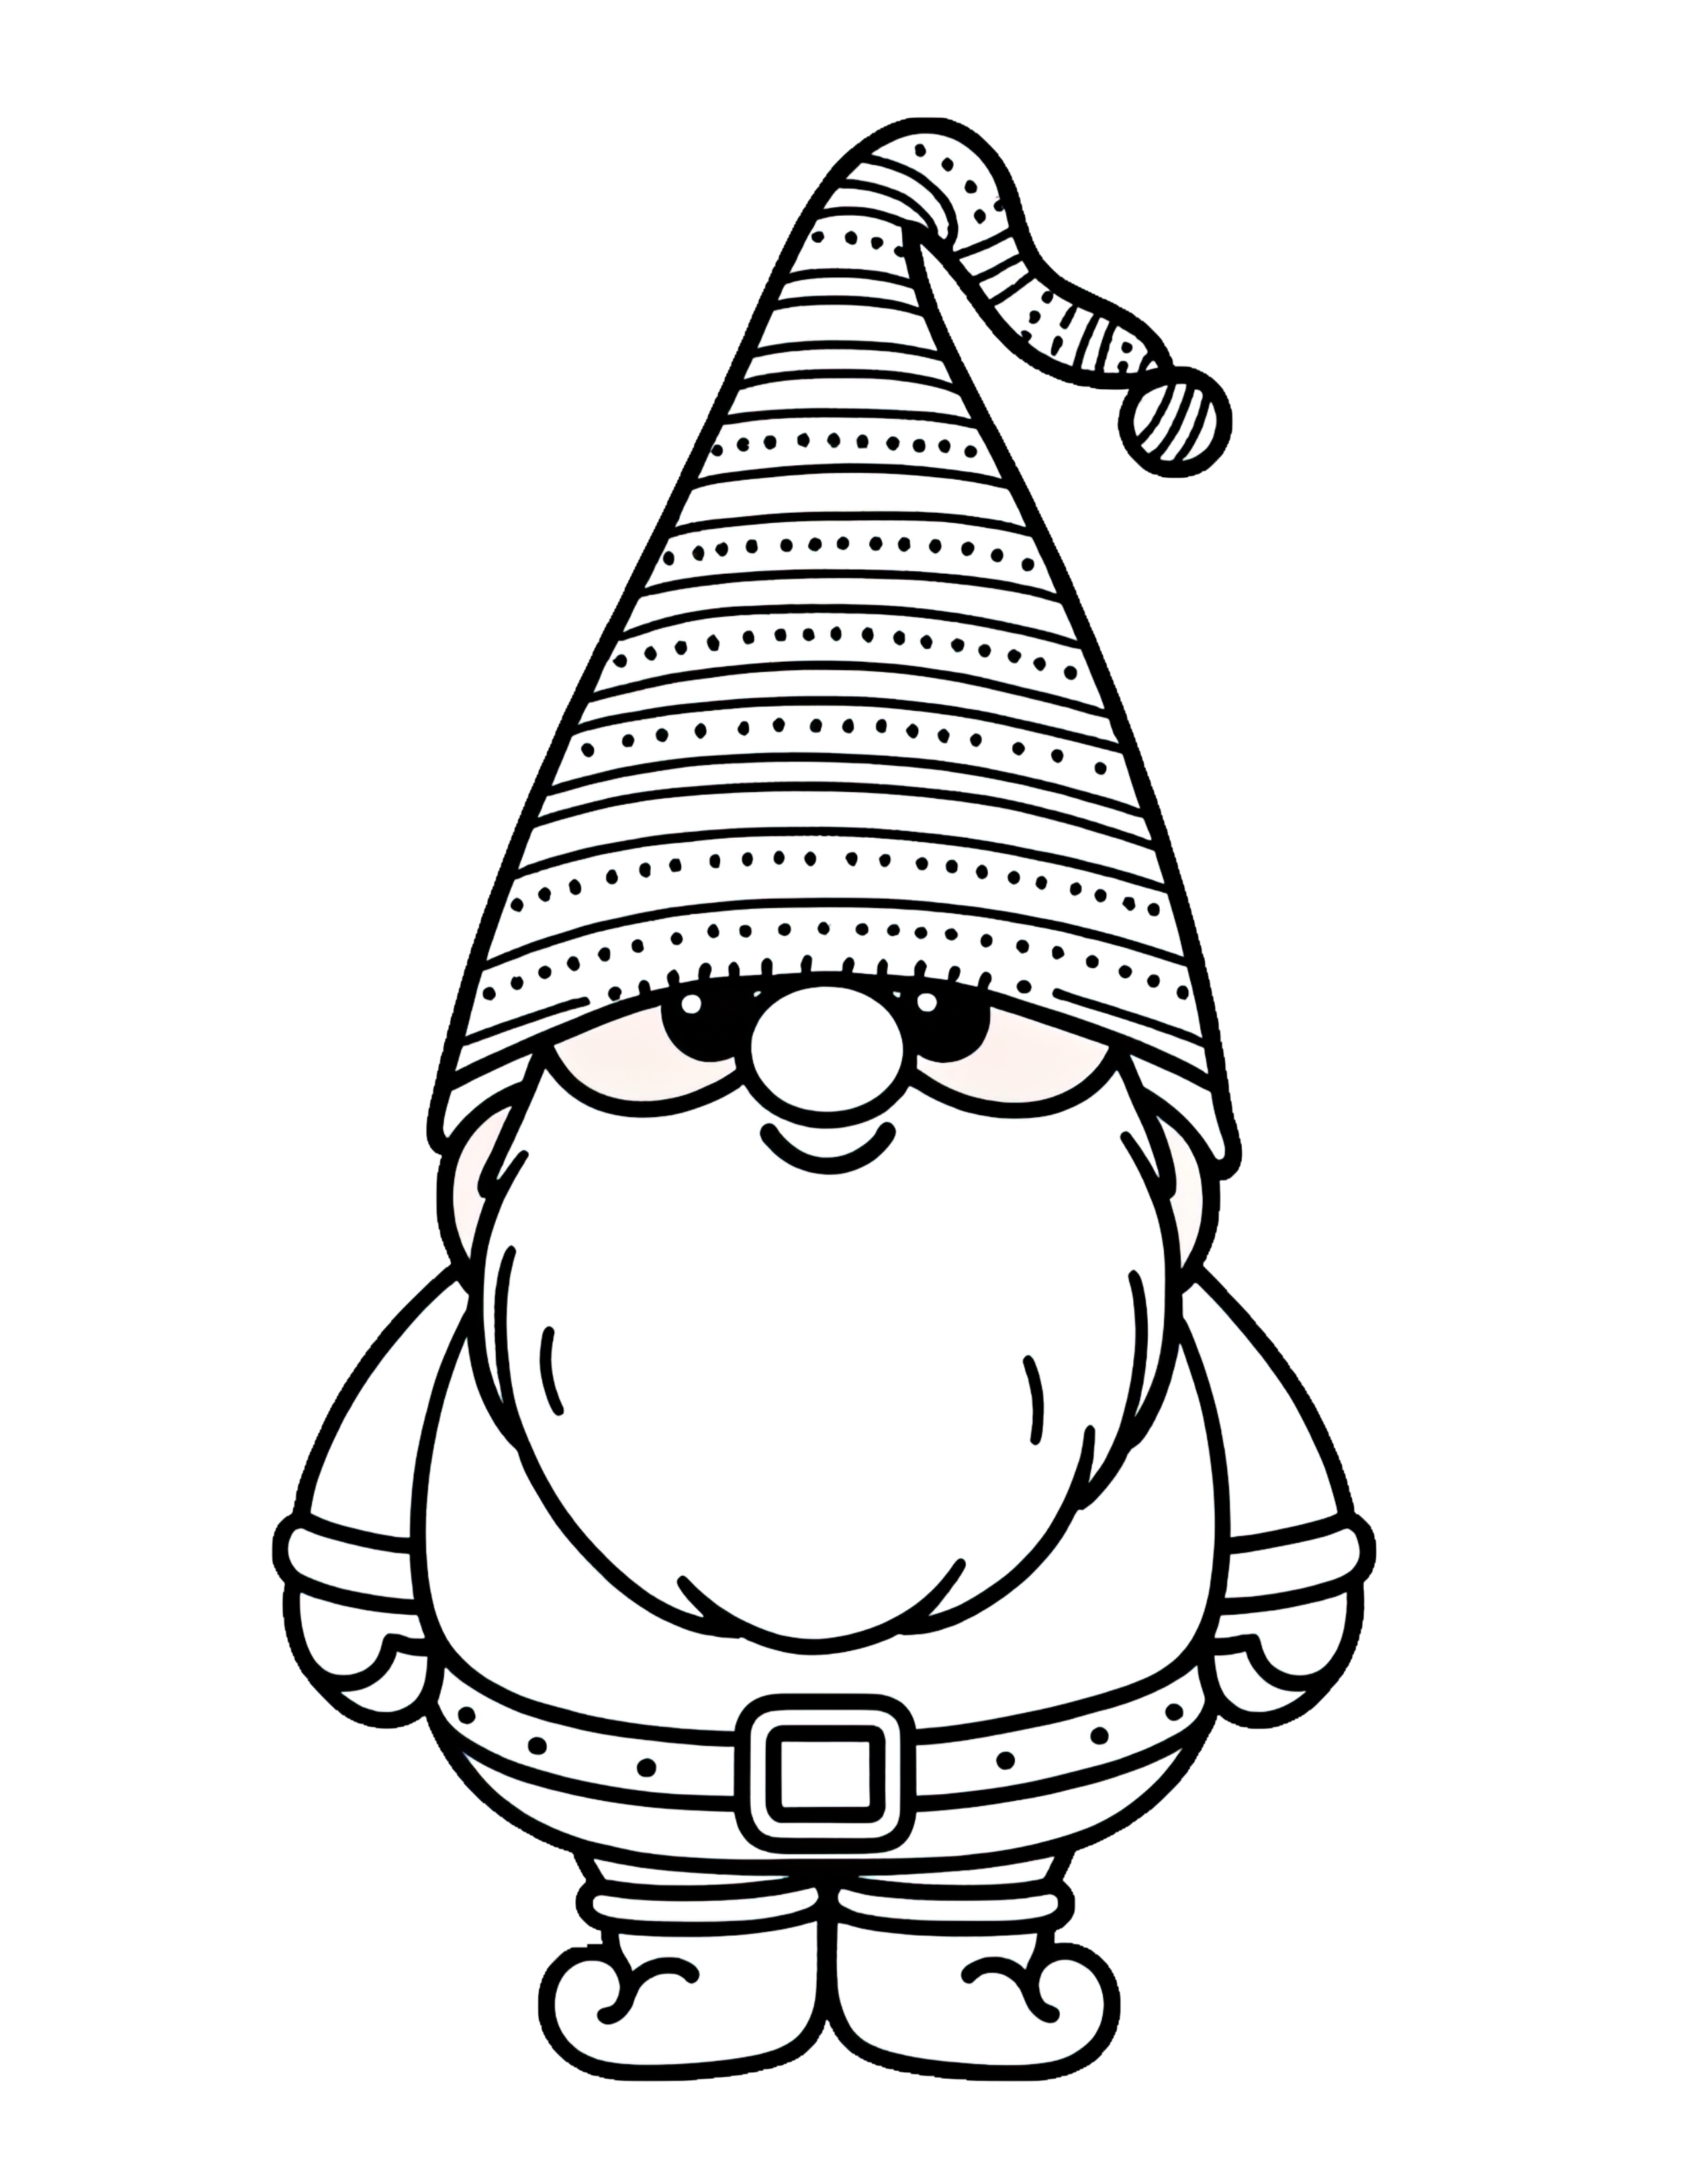 Free Printable Gnome Coloring Page For Kids And Adults